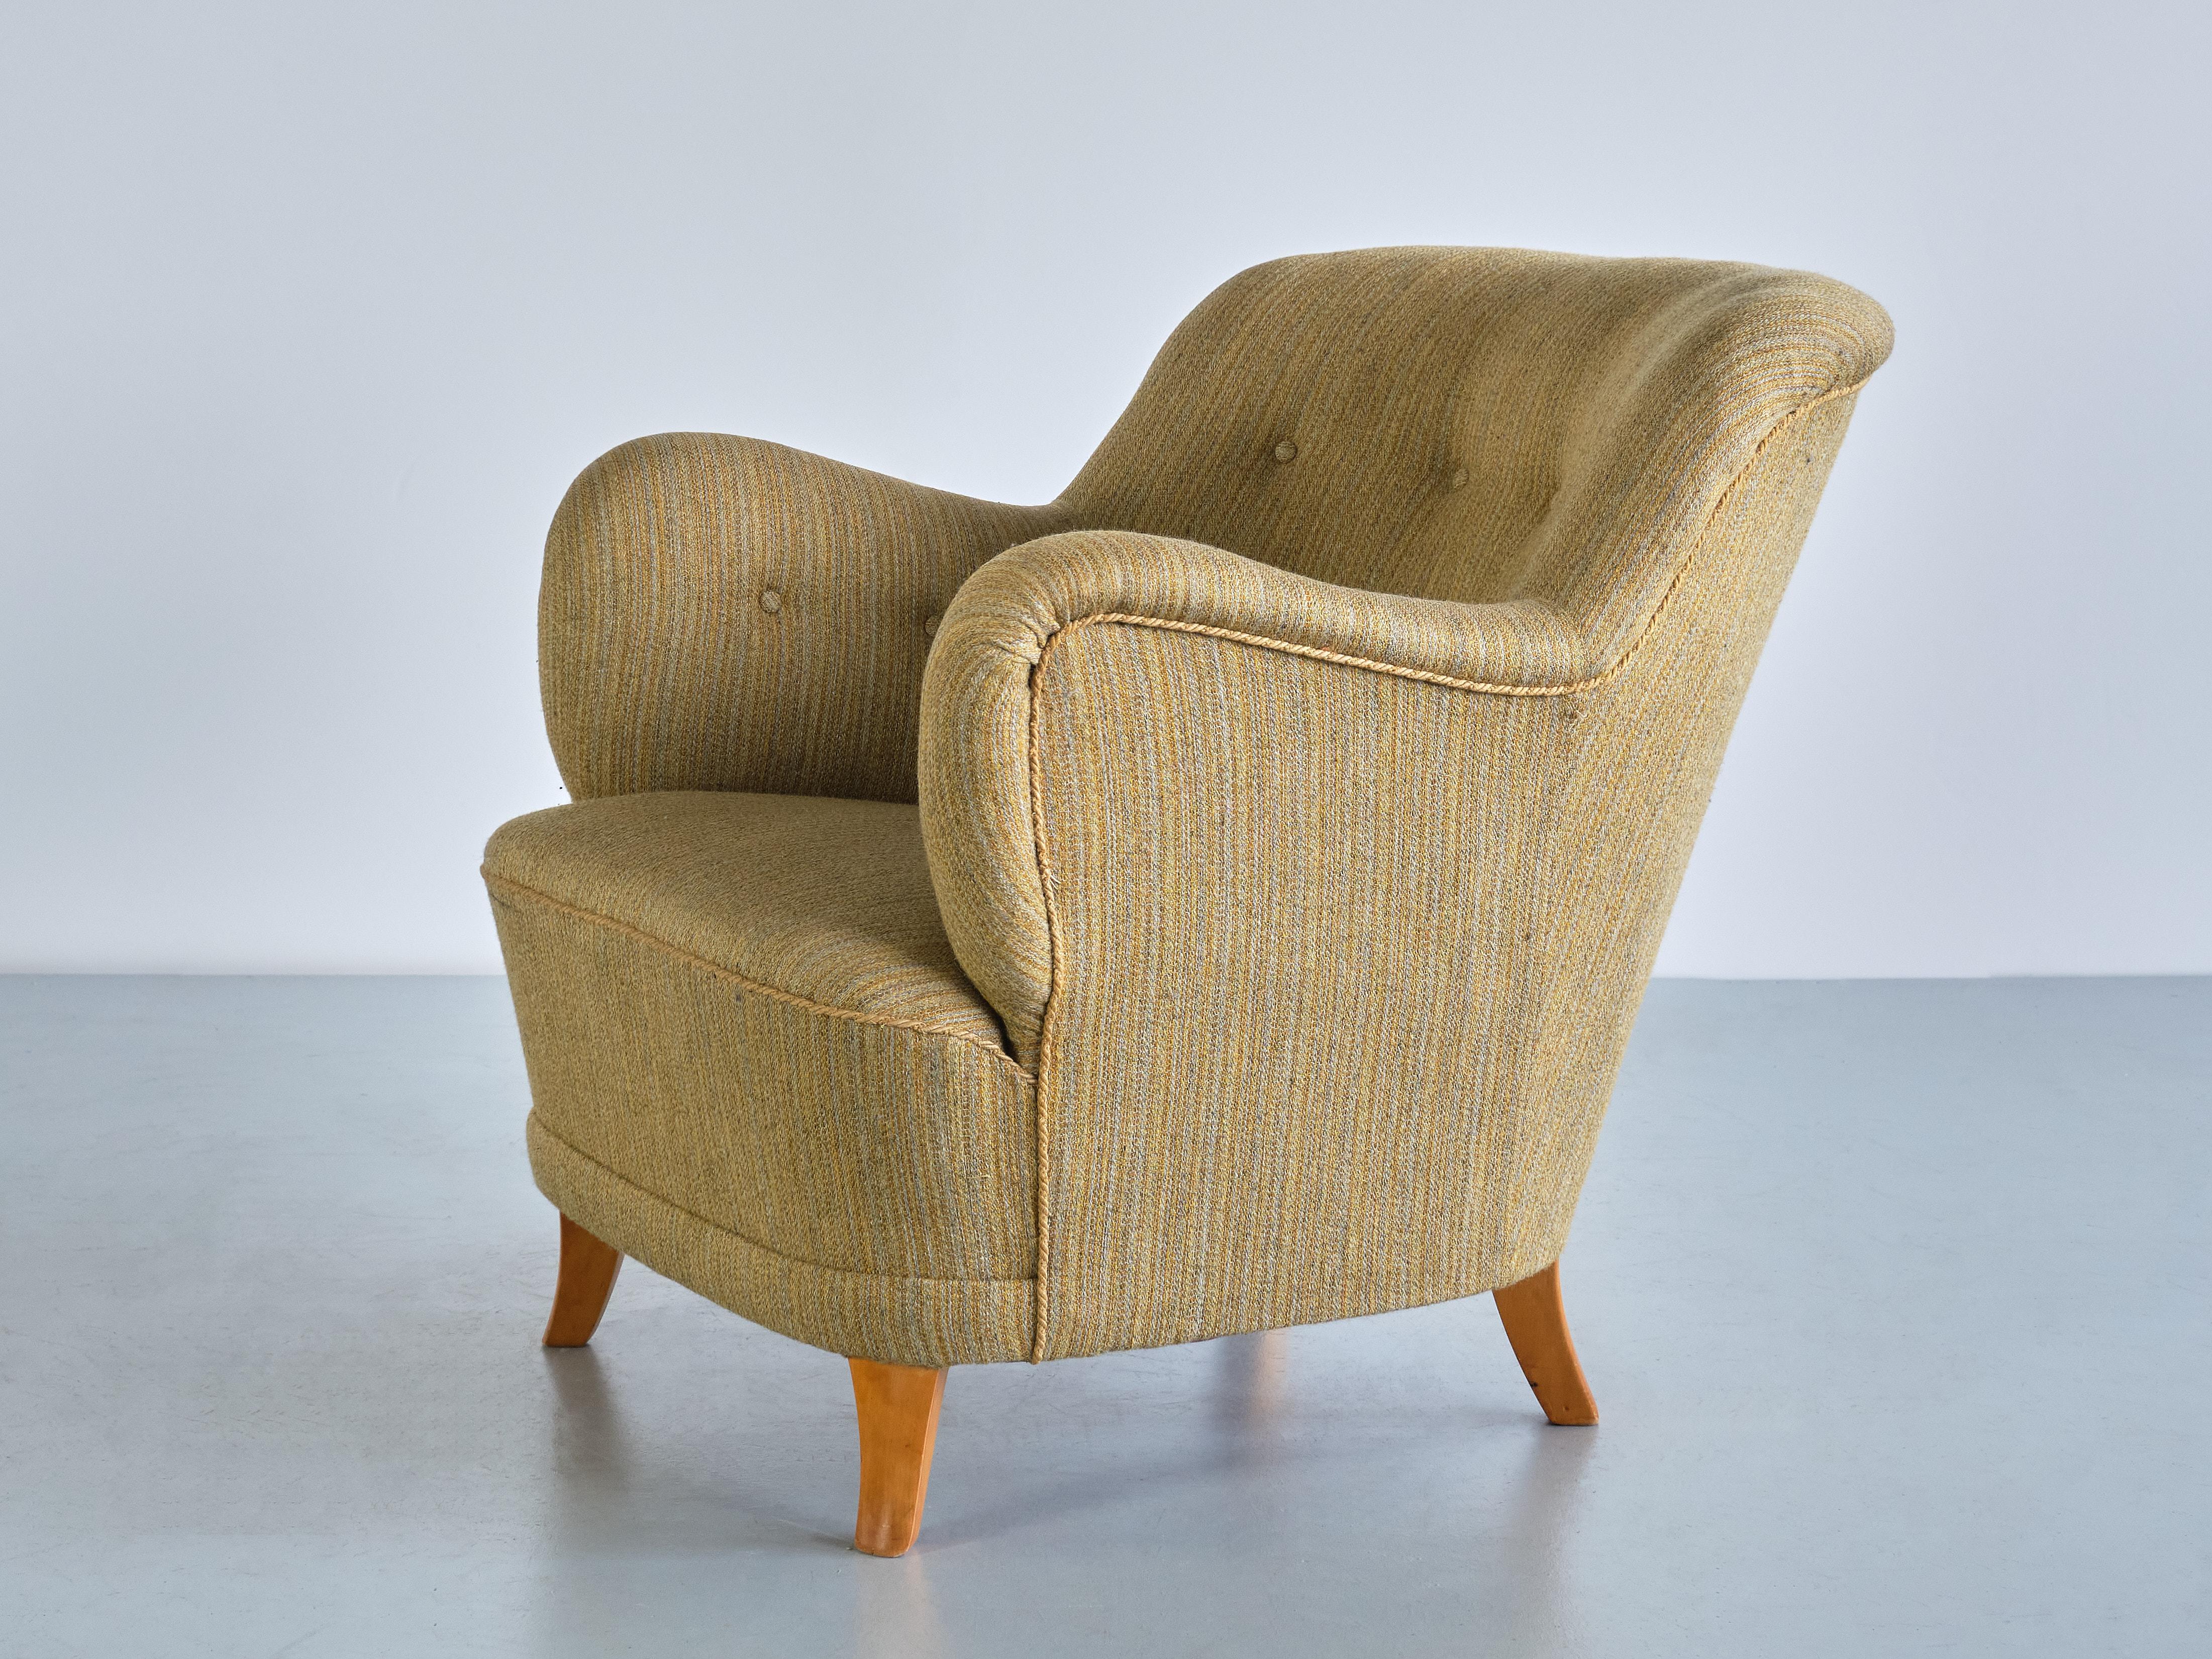 Sculptural Pair of Gustav Axel Berg Armchairs in Beech and Wool, Sweden, 1940s For Sale 3